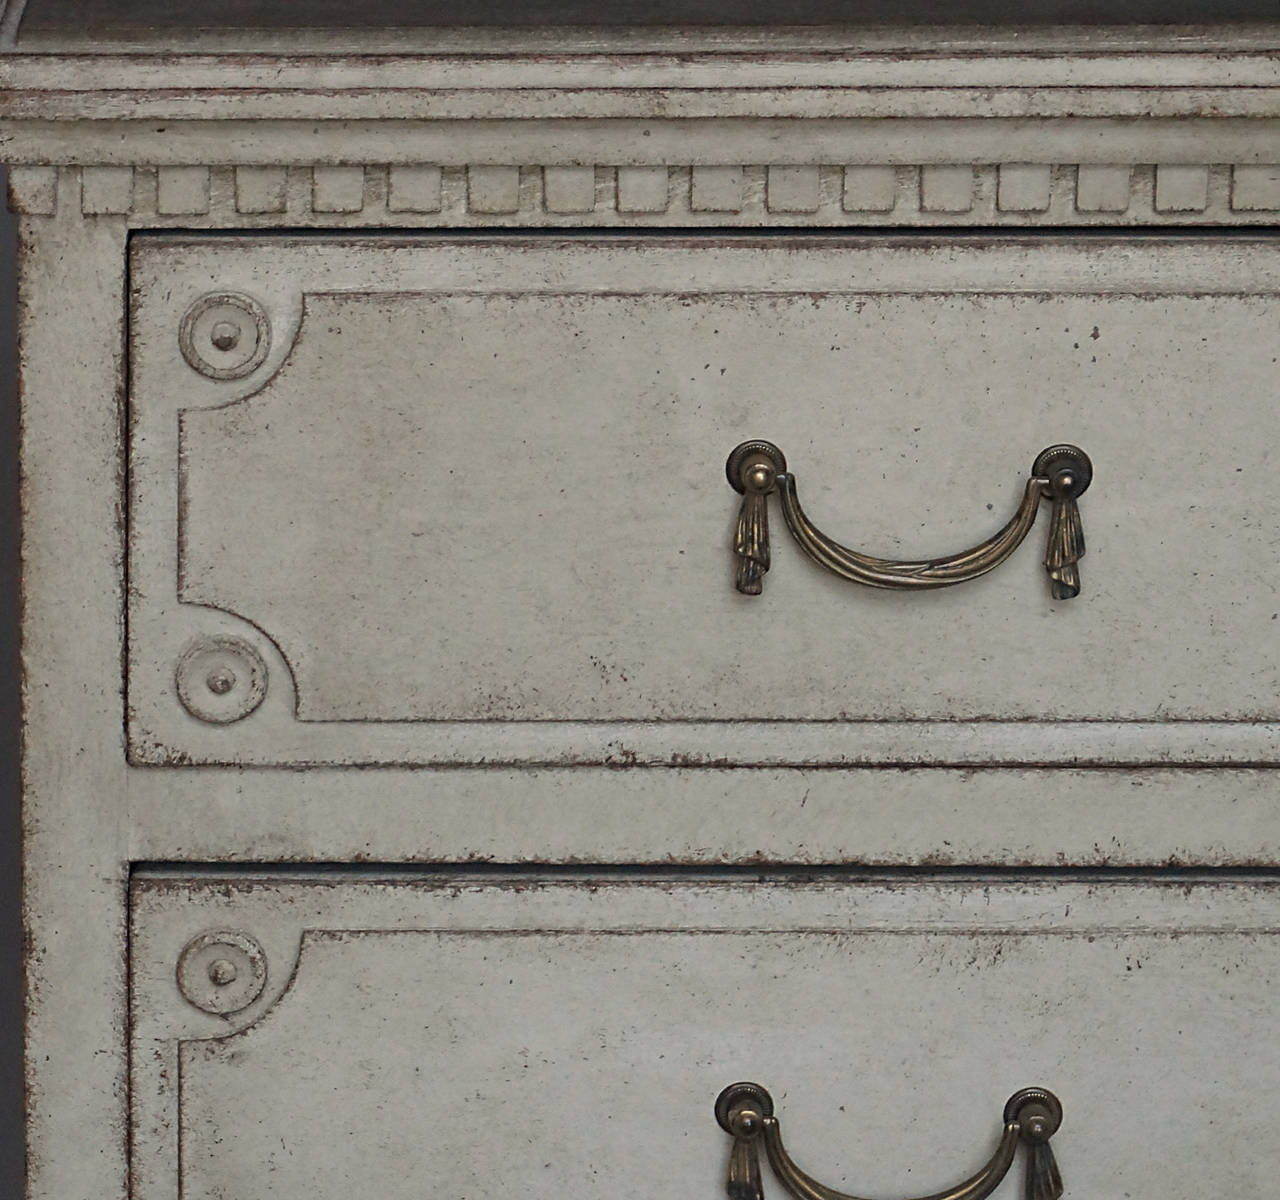 Carved Gustavian Style Chest of Drawers